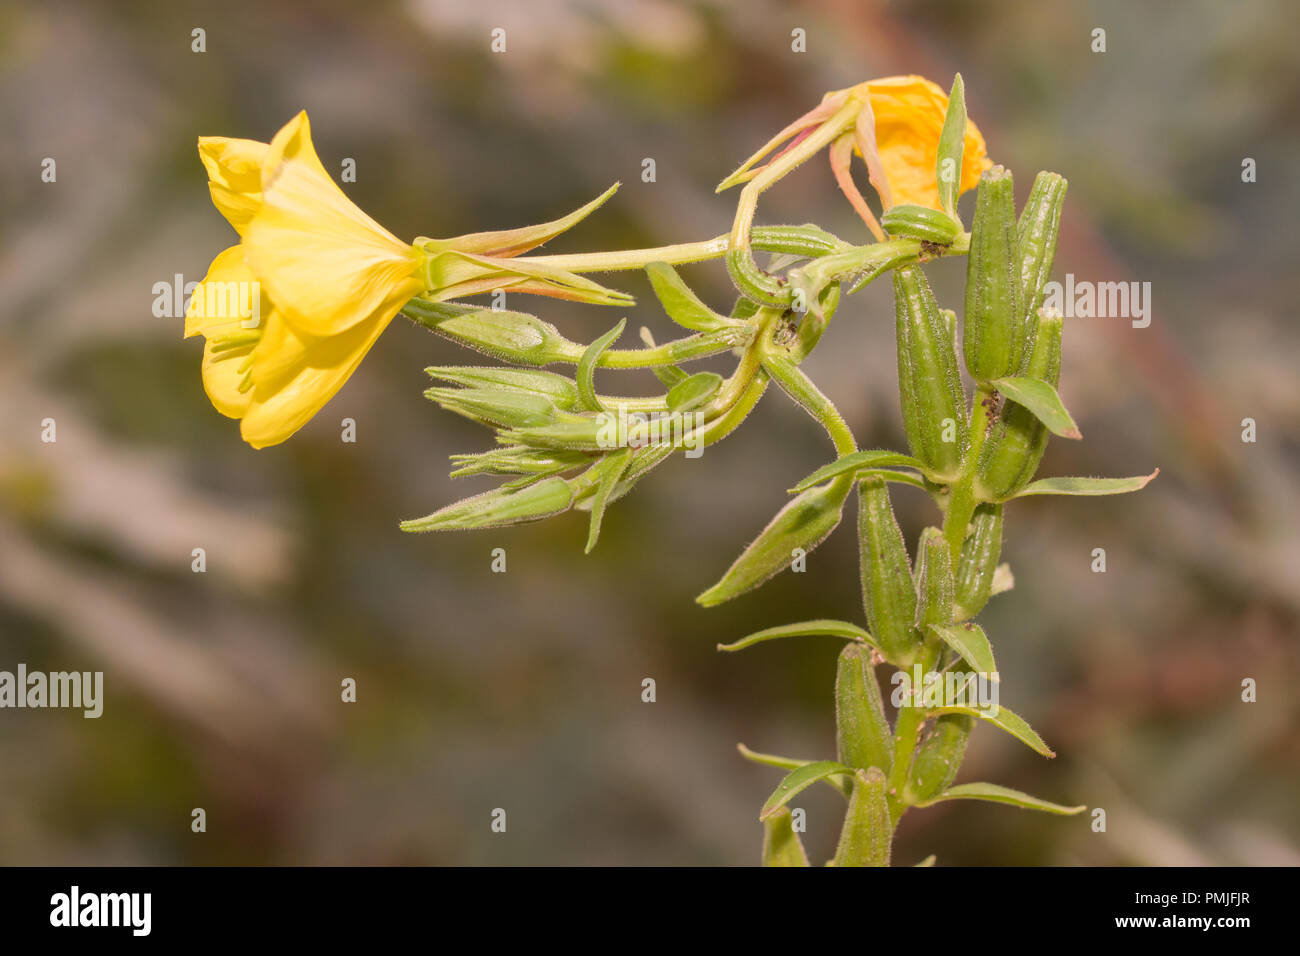 Oenothera biennis, commonly known as  evening primrose, evening star and sun drop. An important plant used in medicine world wide. Stock Photo